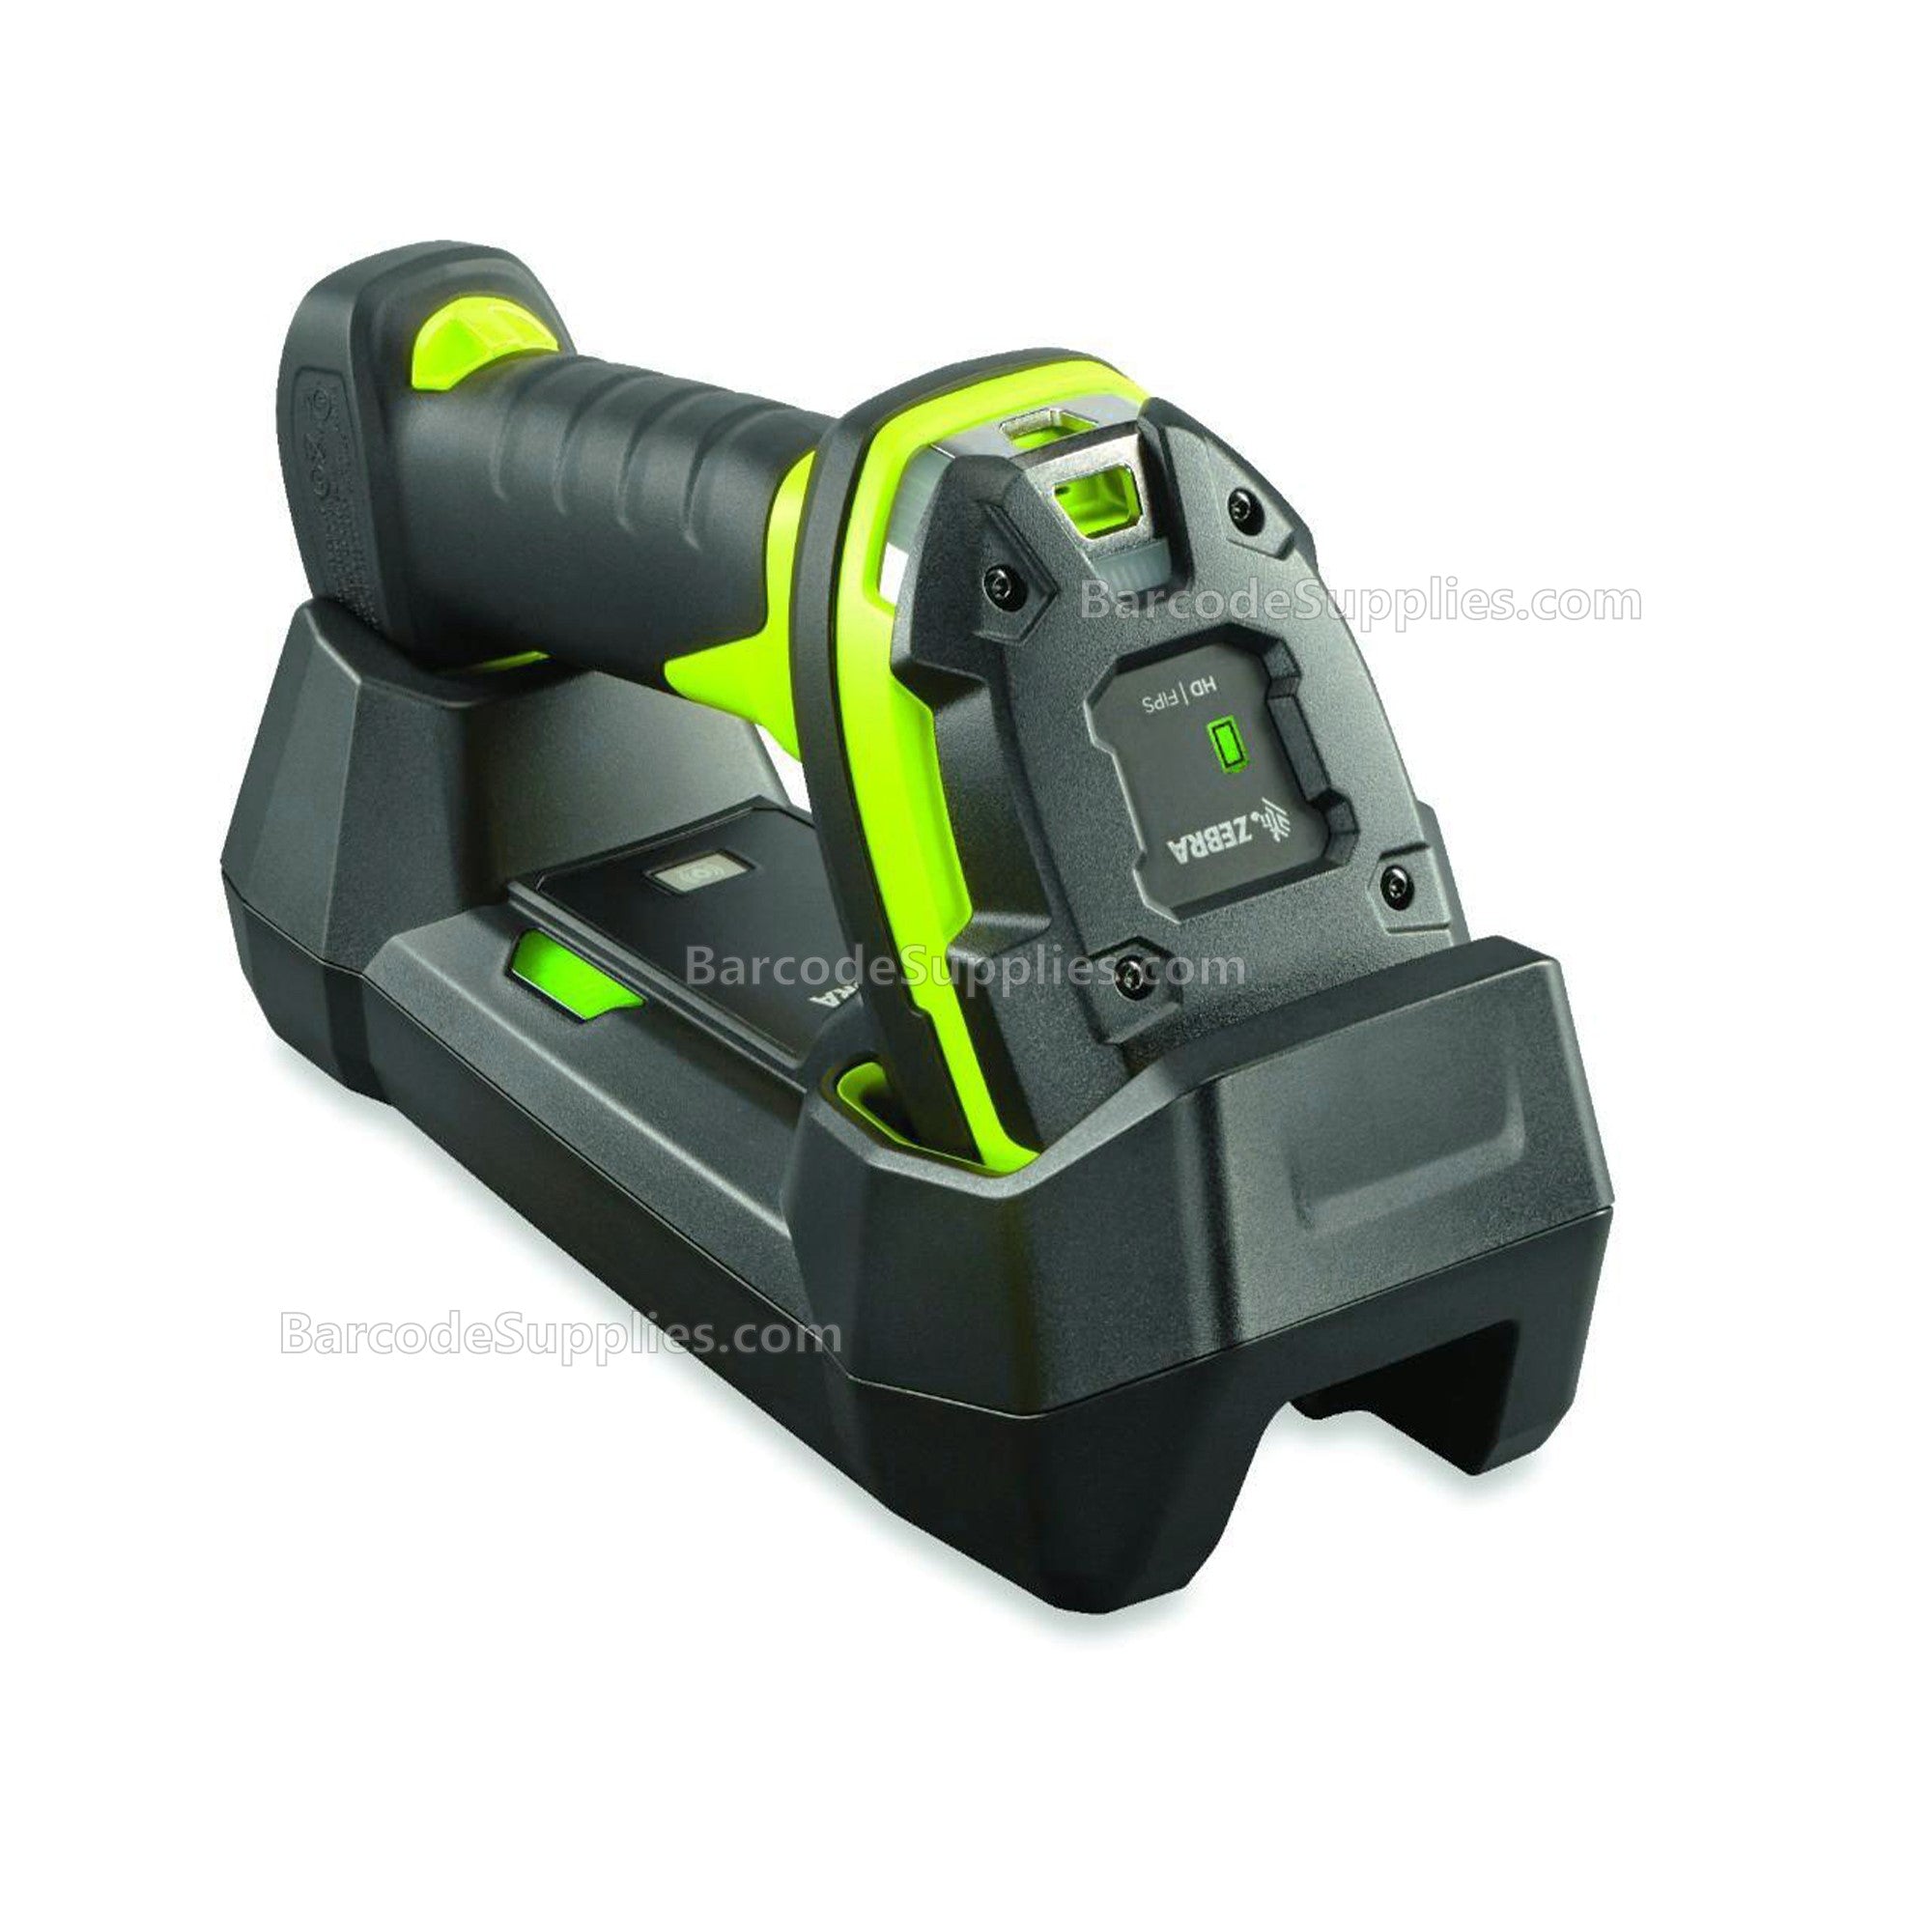 Zebra DS3678-HP Rugged Green Standard Cradle USB Kit: DS3678-HP2F003VZWW Scanner, CBA-U42-S07PAR Shielded USB Cable Supports 12V P/S, STB3678-C100F3WW Cradle, PWR-BGA12V50W0WW, CBL-DC-451A1-01 and 23844-00-00R Line Cords